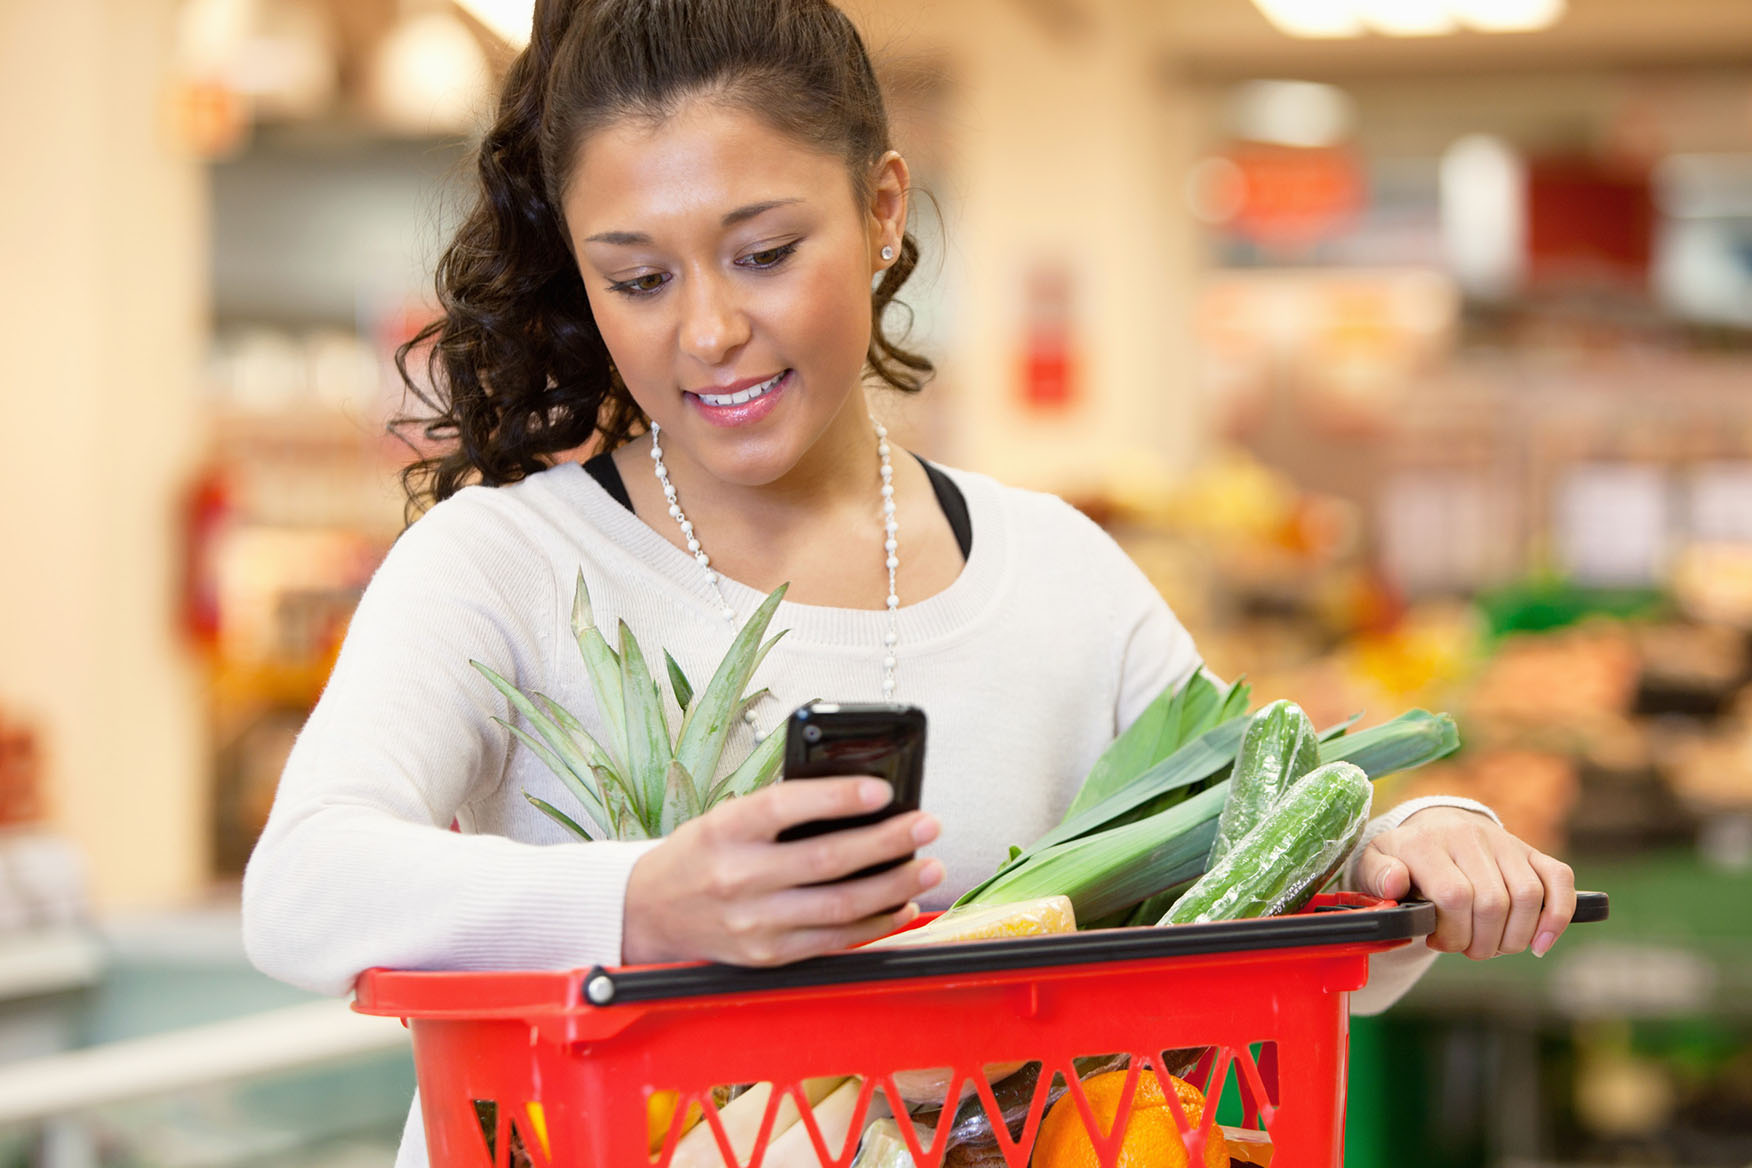 Woman checking shopping list on her phone while she holds a grocery basket